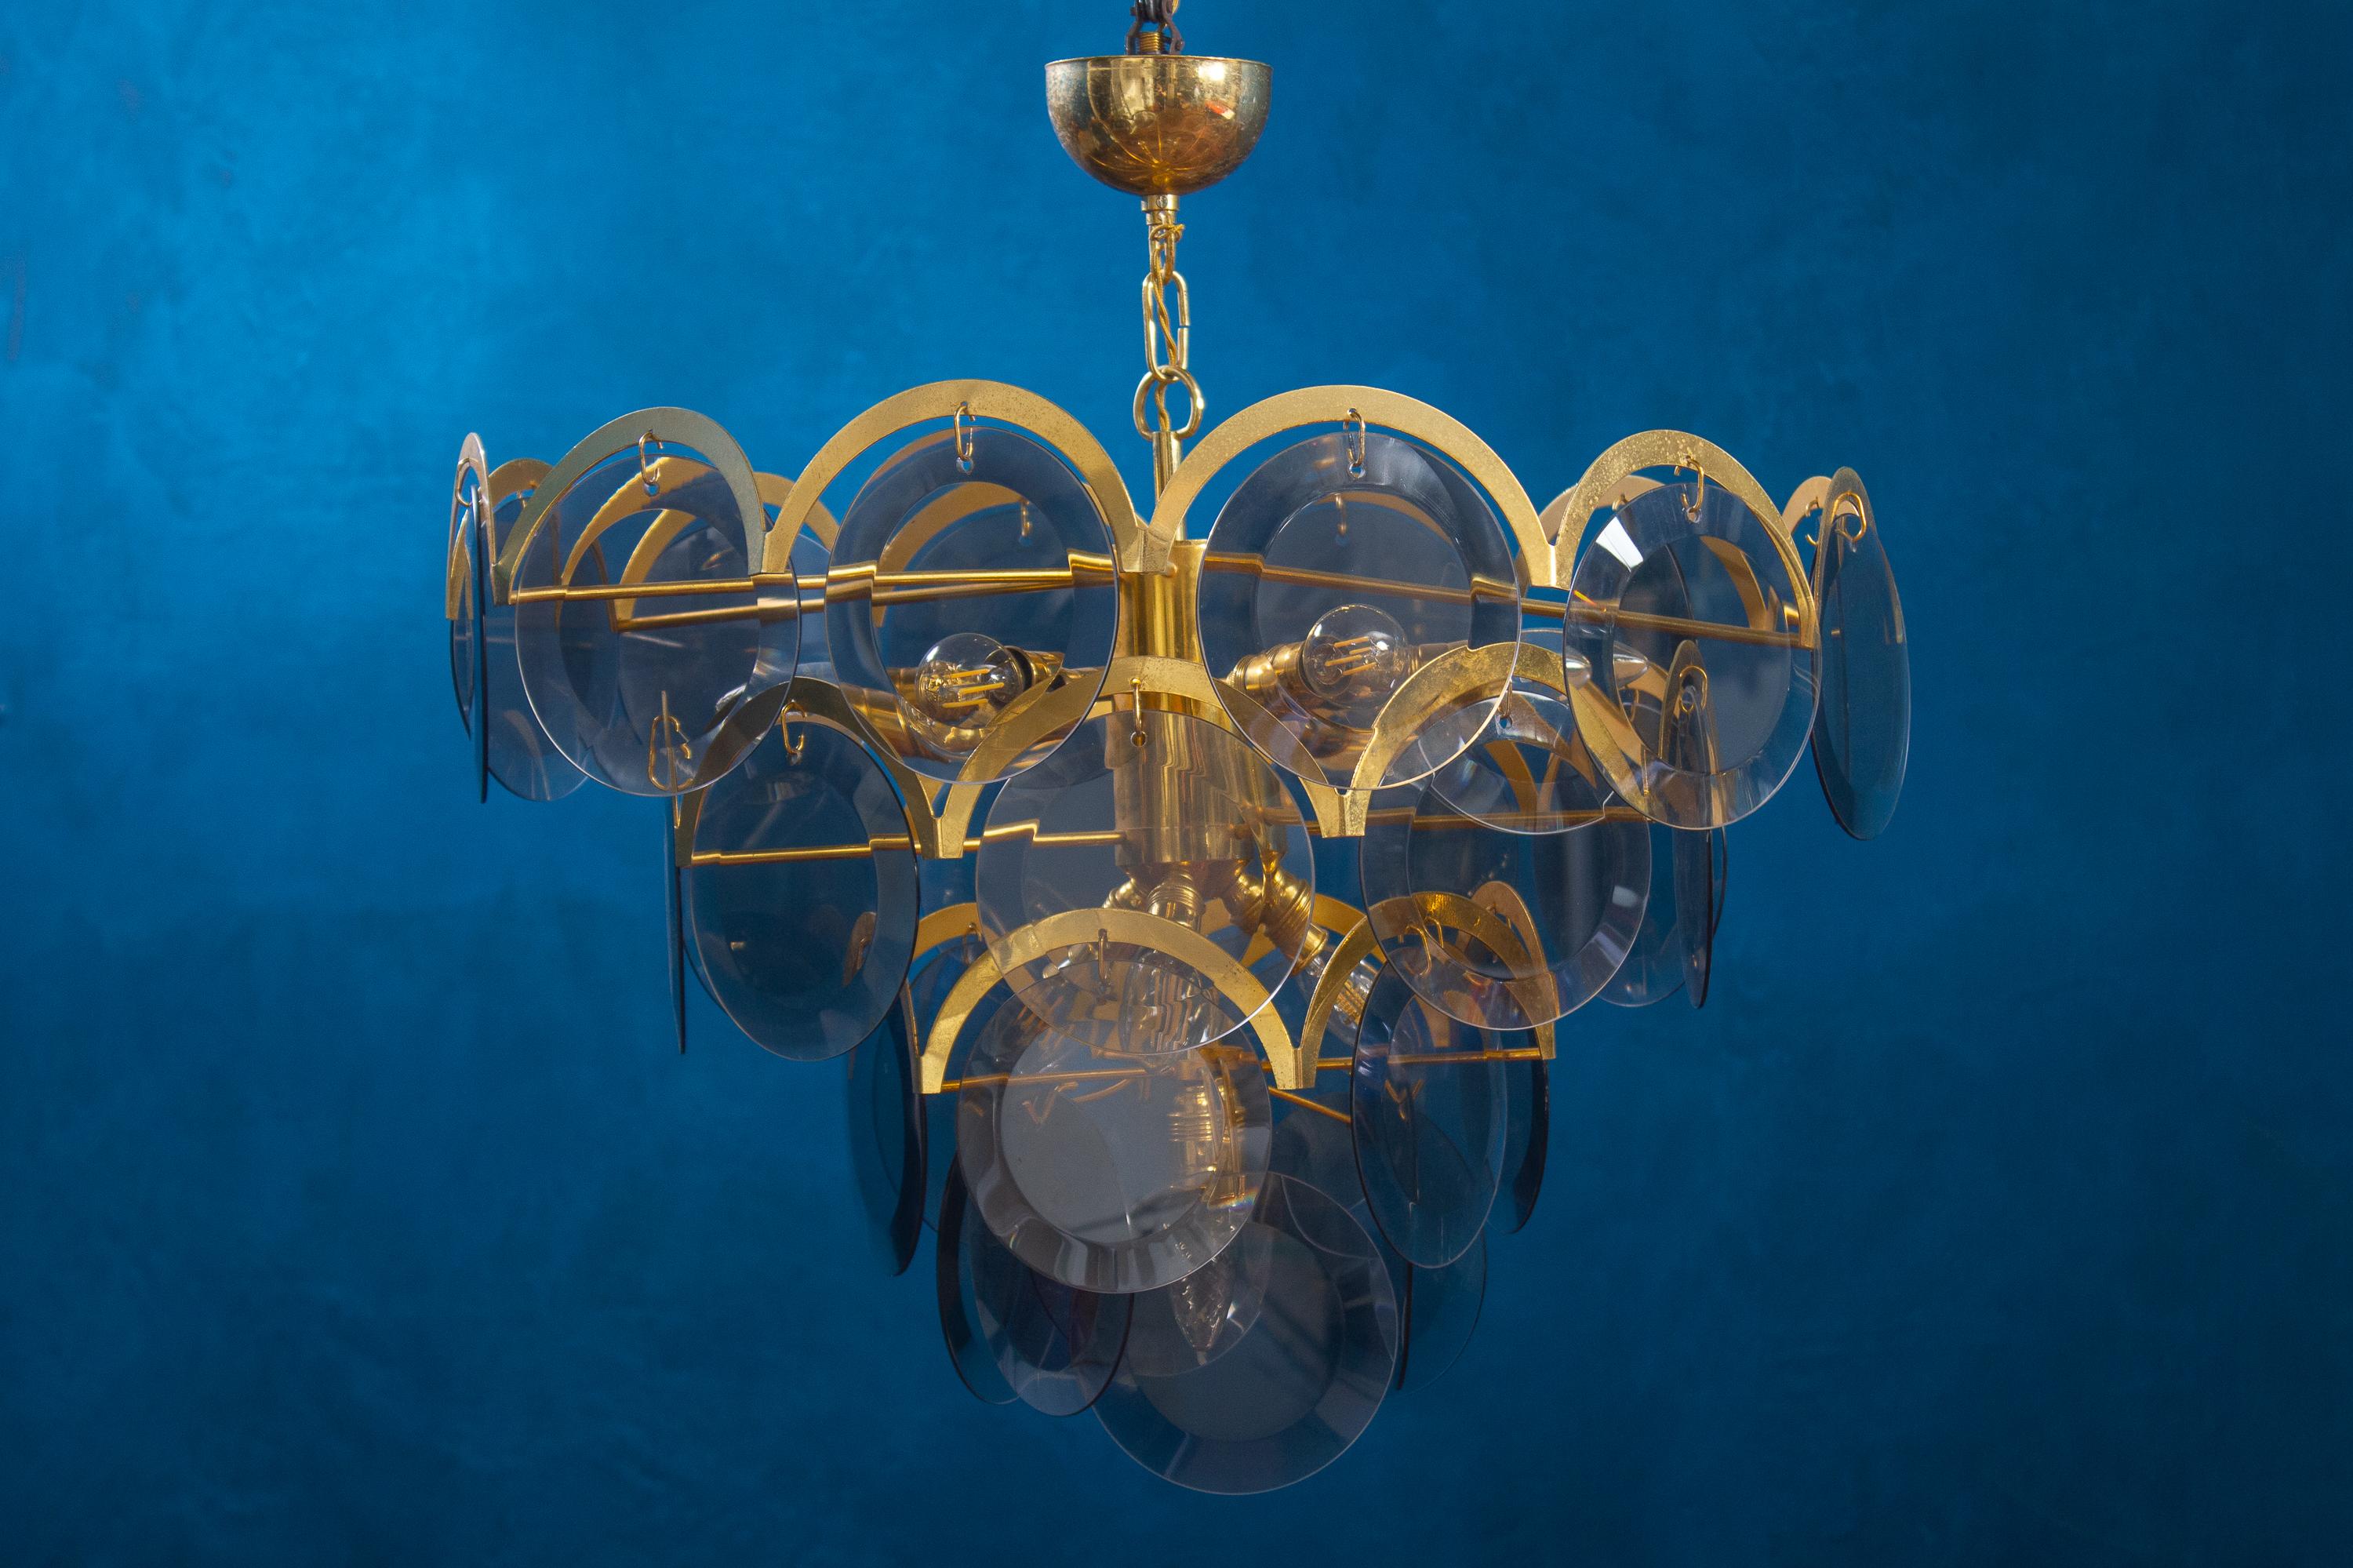 Spectacular chandelier by Vistosi made with 48 grey fumé beveled Murano discs a four levels.
The cage and armature are original brass. Each glass disk is 6